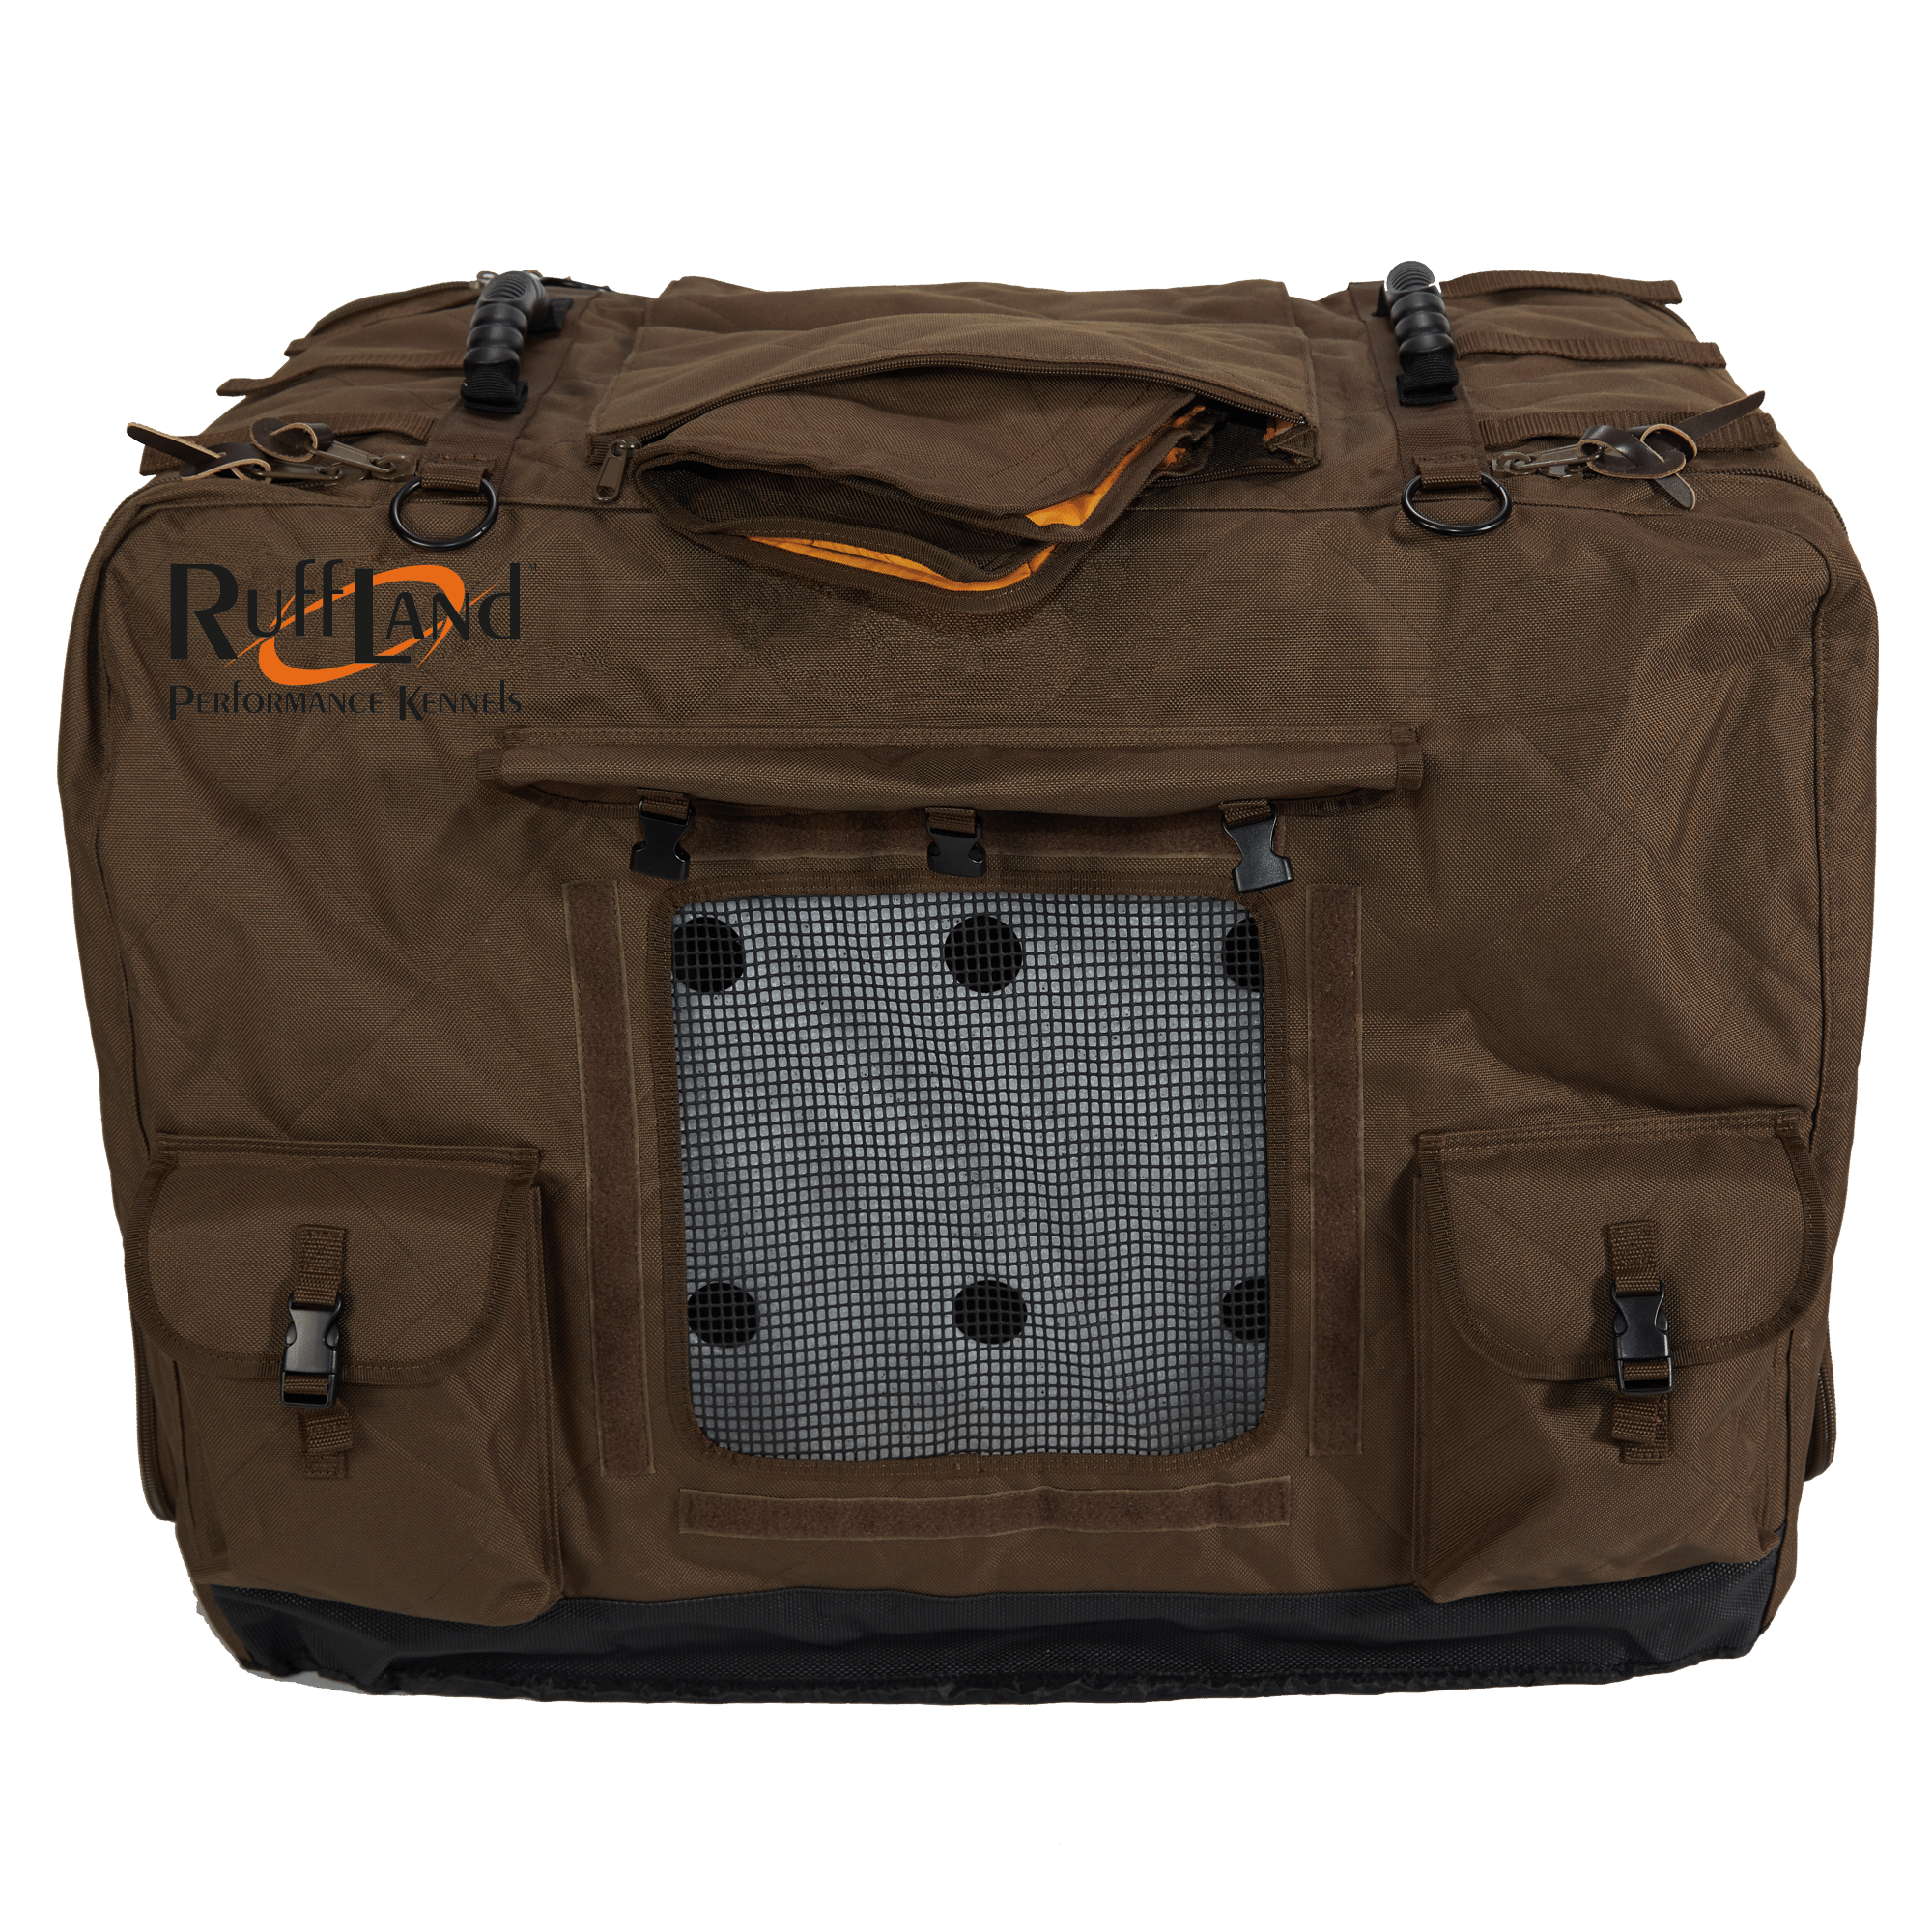 Mud River Dog Kennel Cover Ruff Land Double Door Kennels